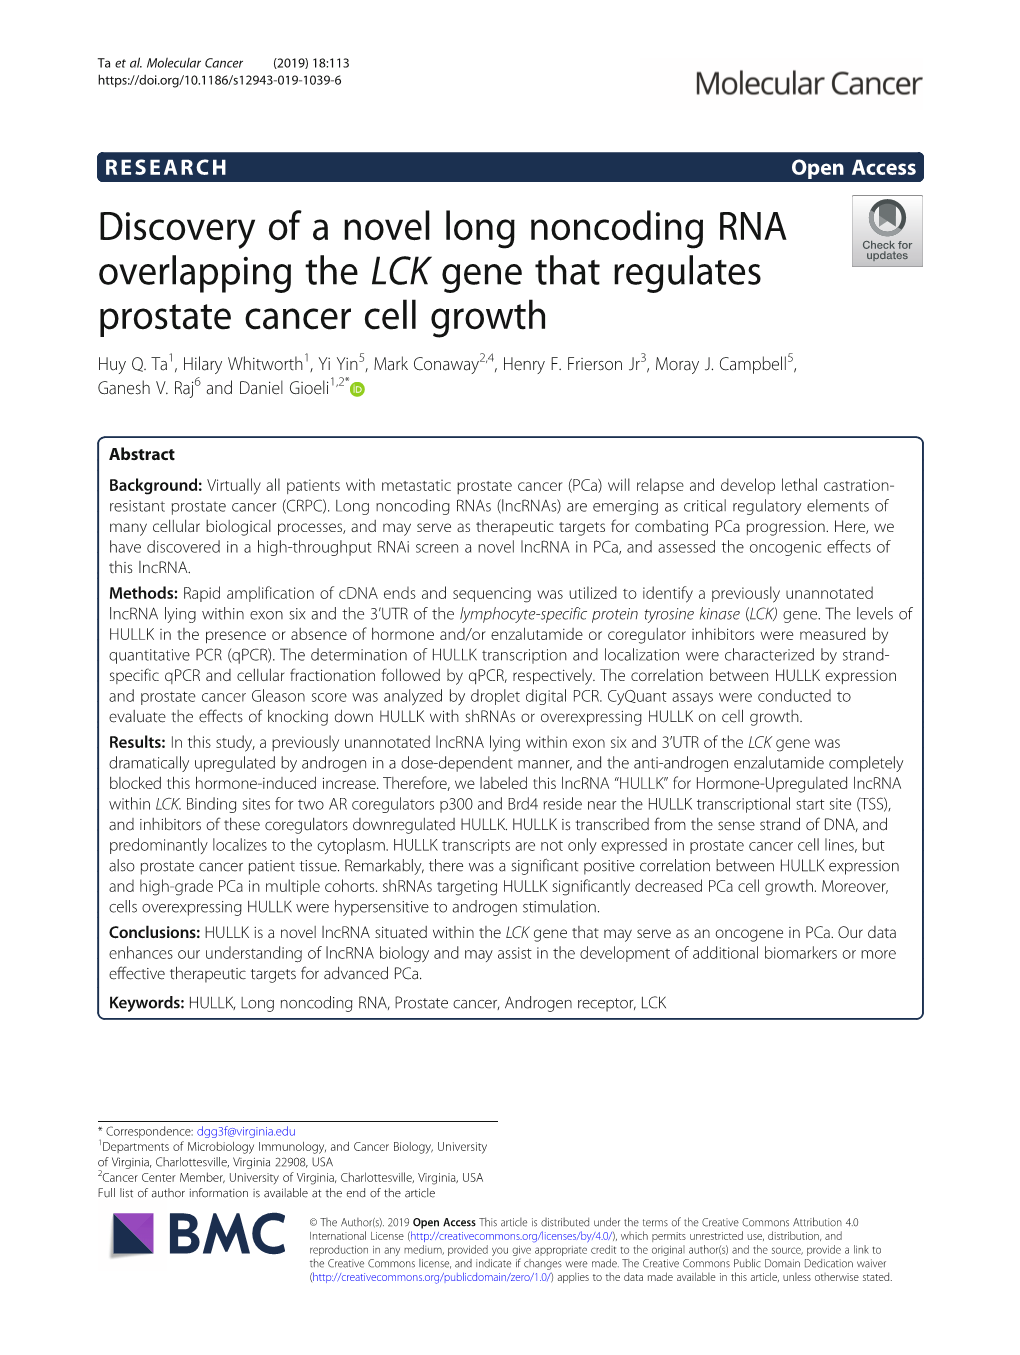 Discovery of a Novel Long Noncoding RNA Overlapping the LCK Gene That Regulates Prostate Cancer Cell Growth Huy Q